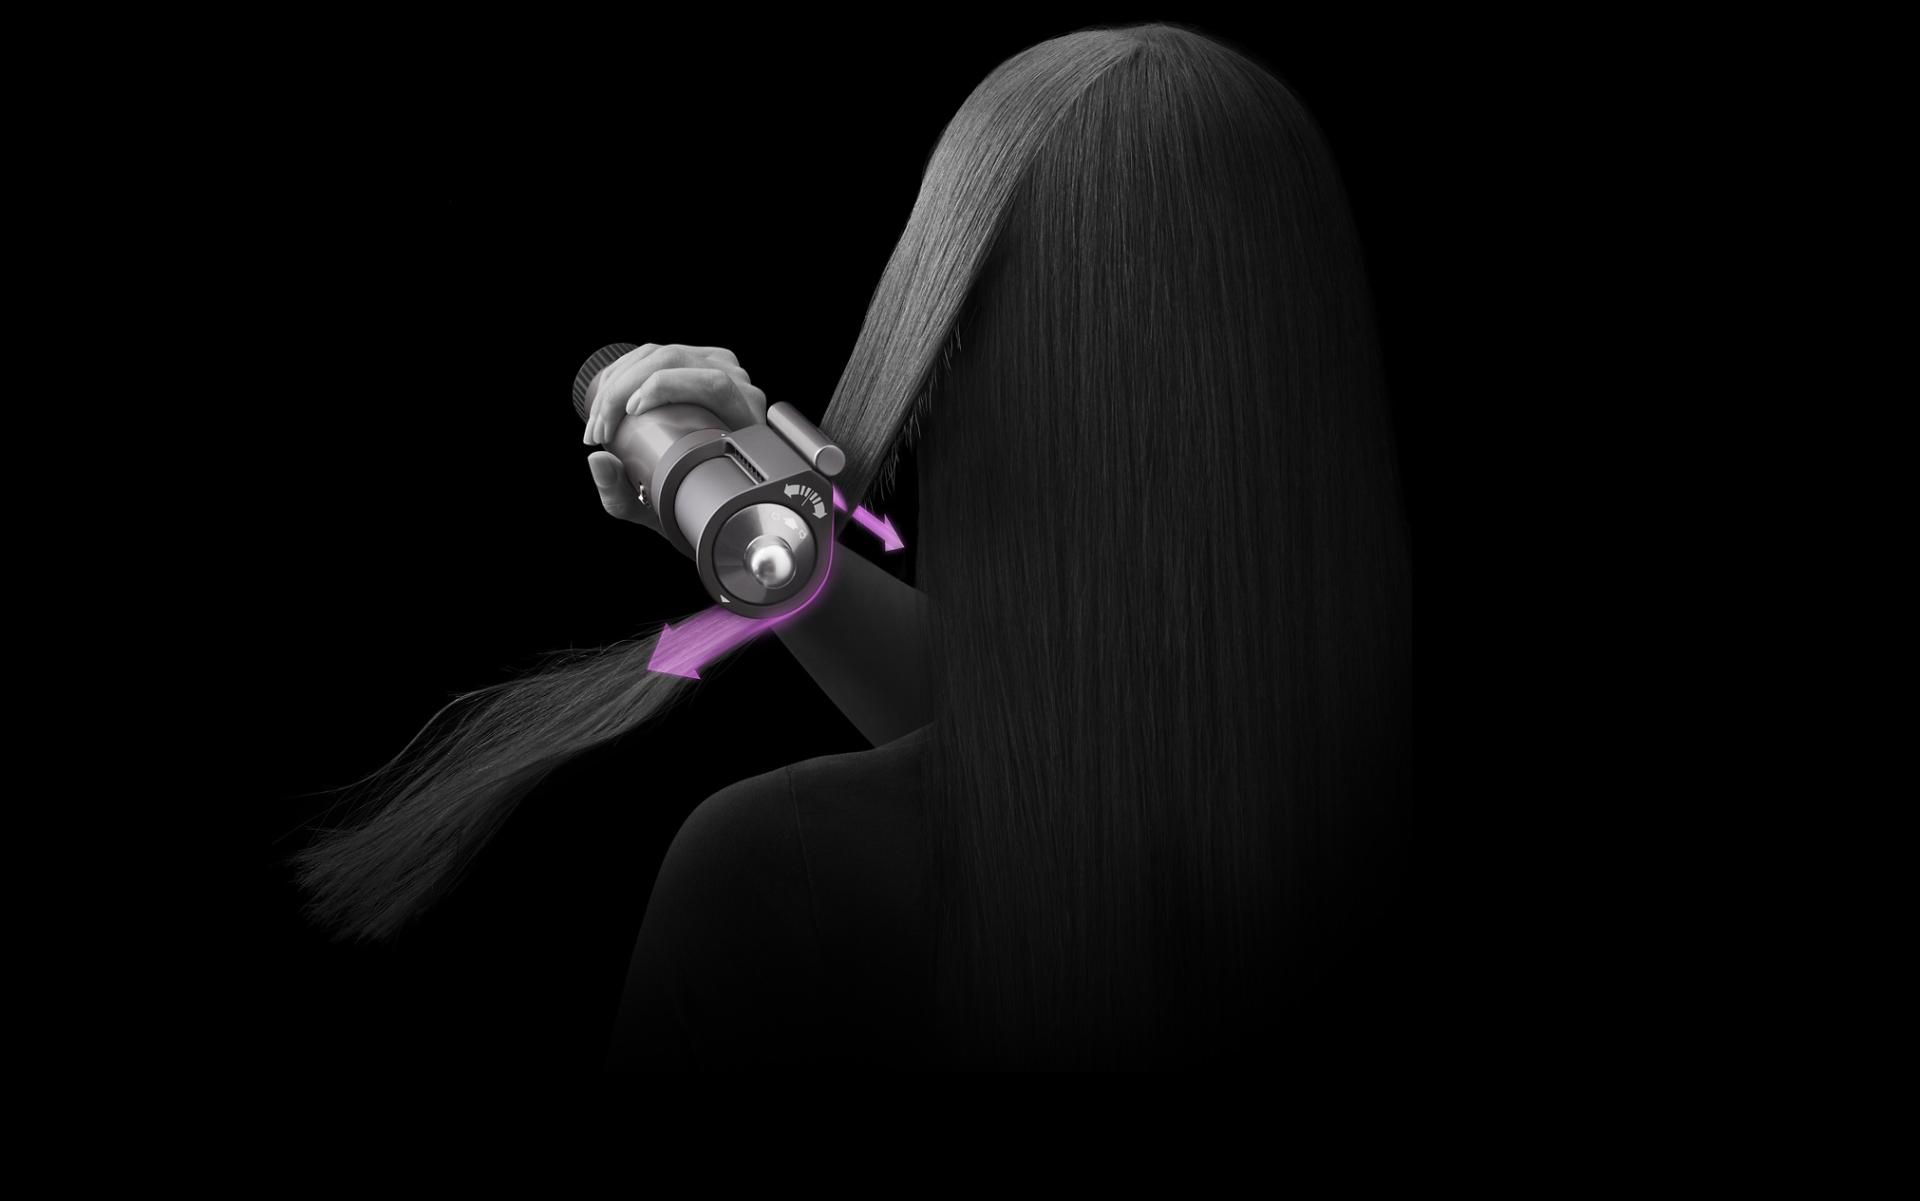 Model using Coanda smoothing dryer attachment in Smoothing mode